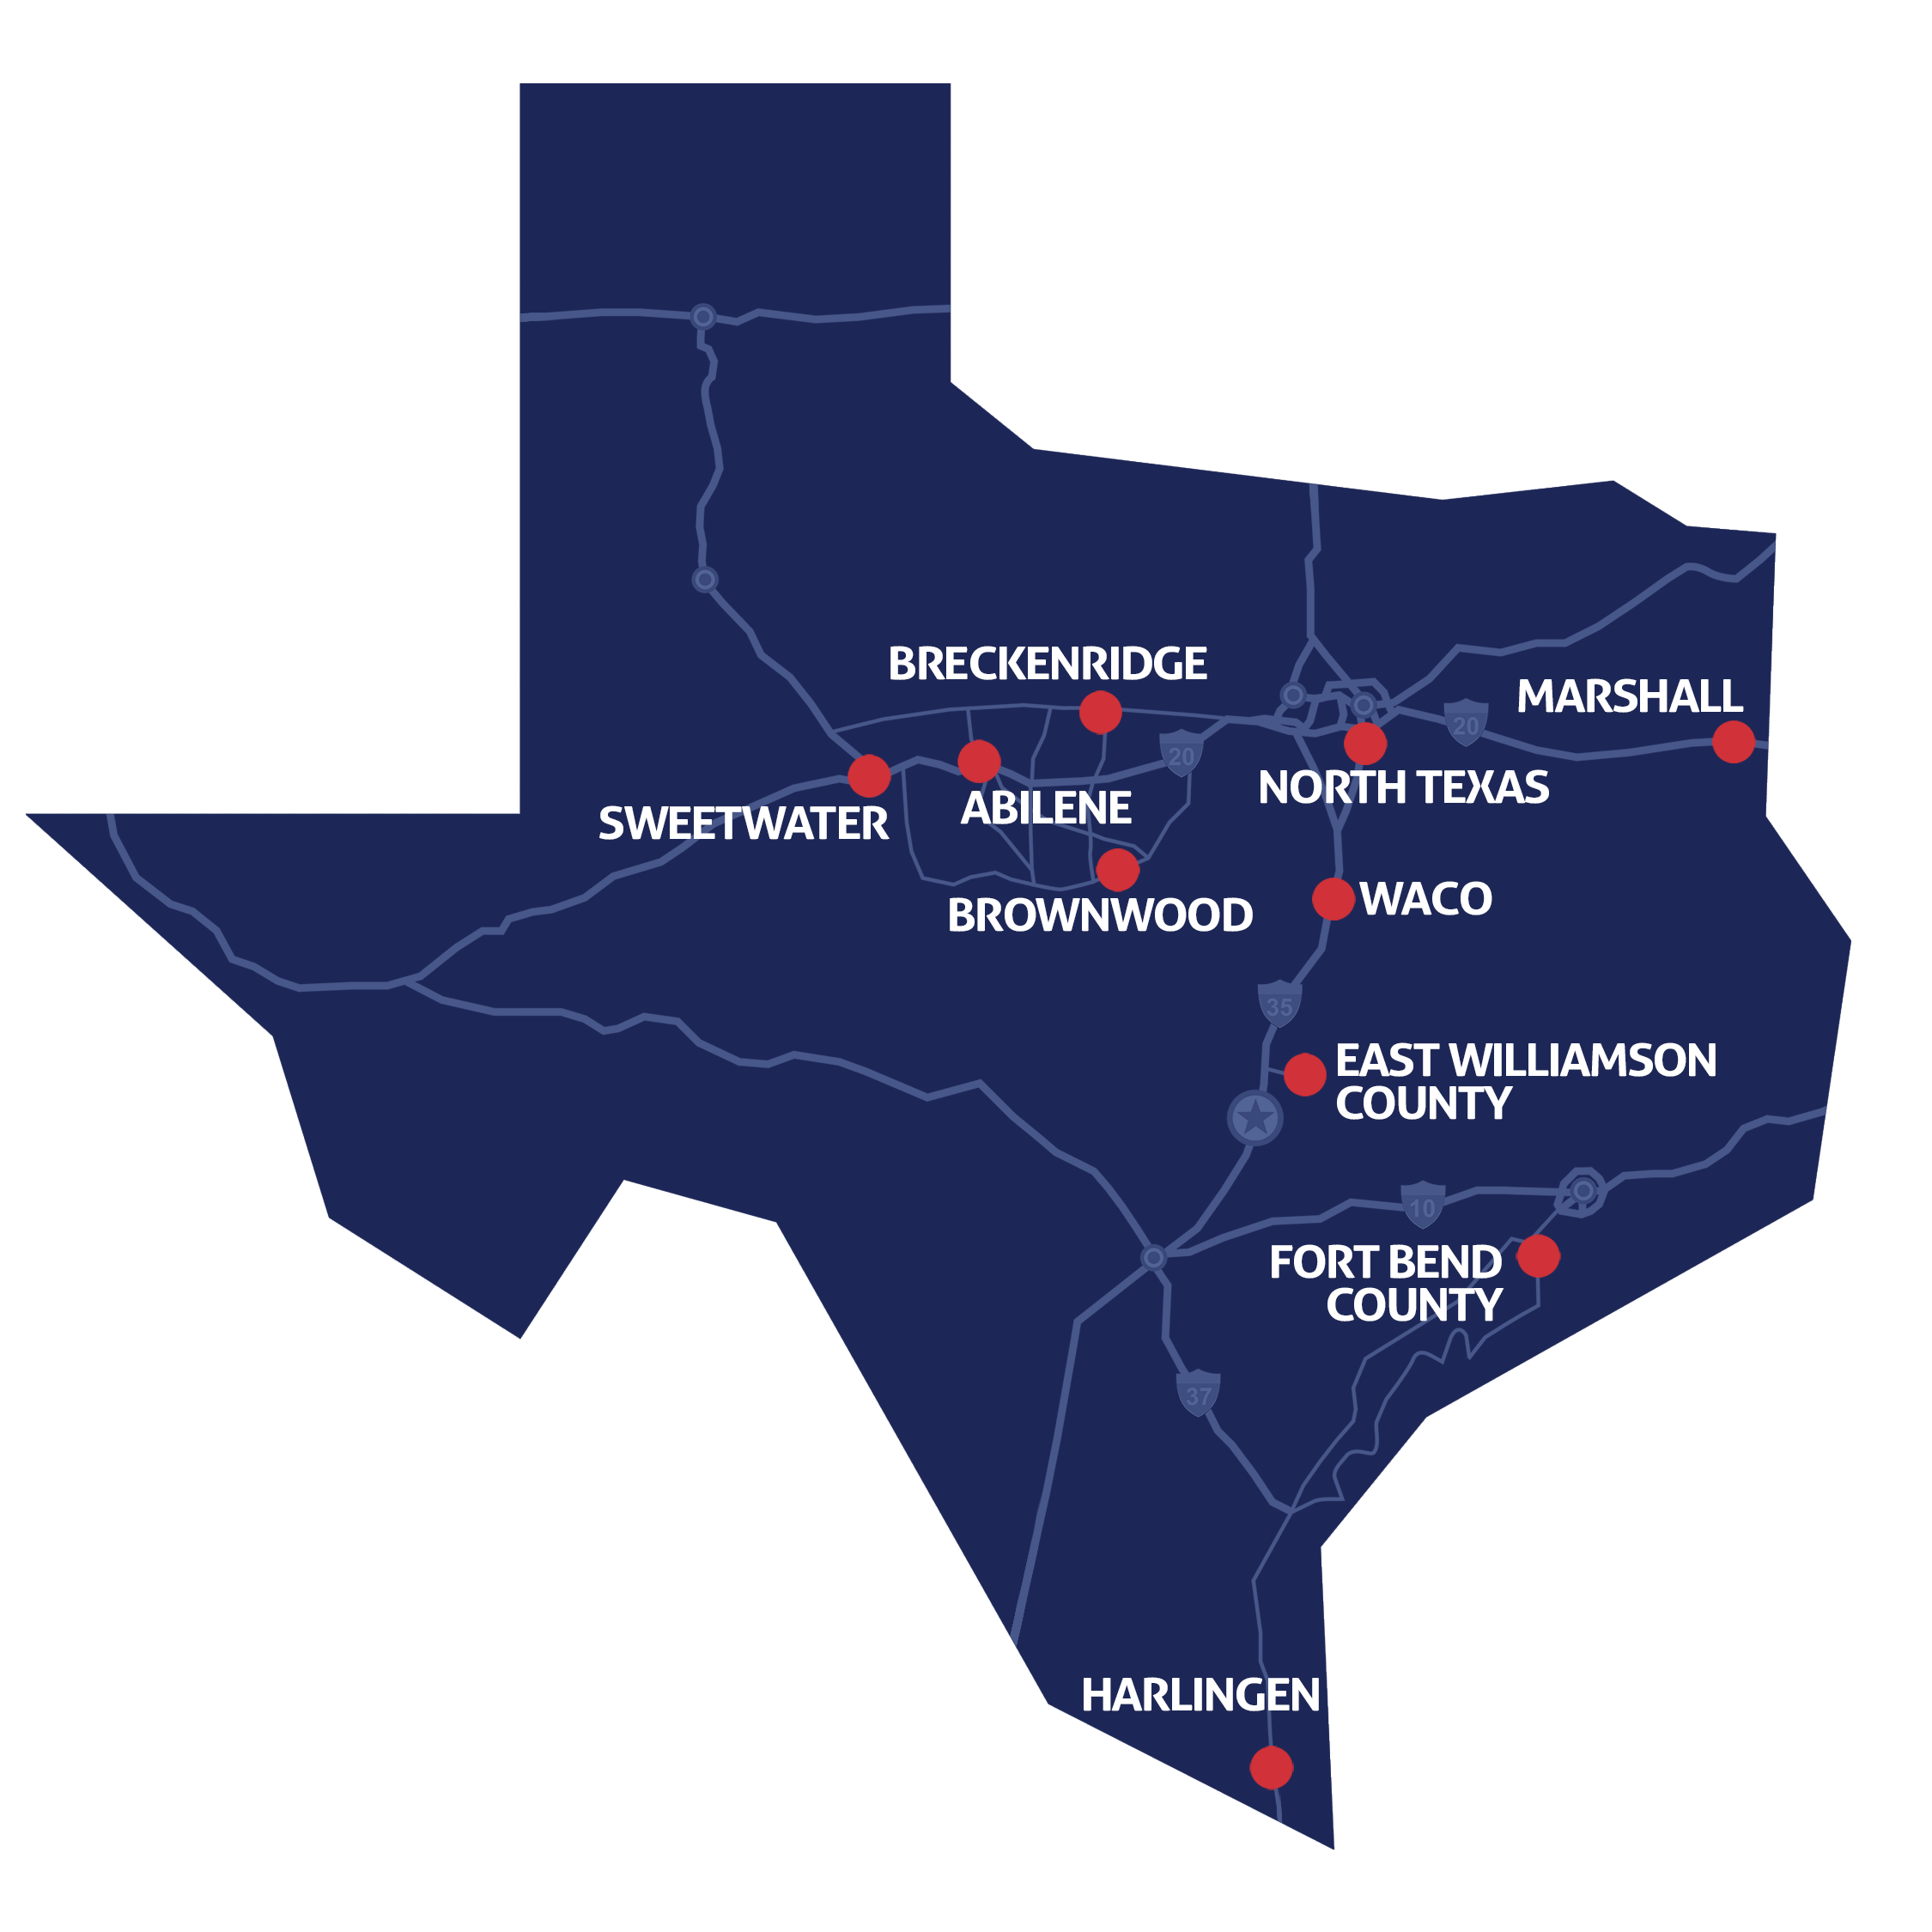 Shape of Texas with all 10 TSTC locations